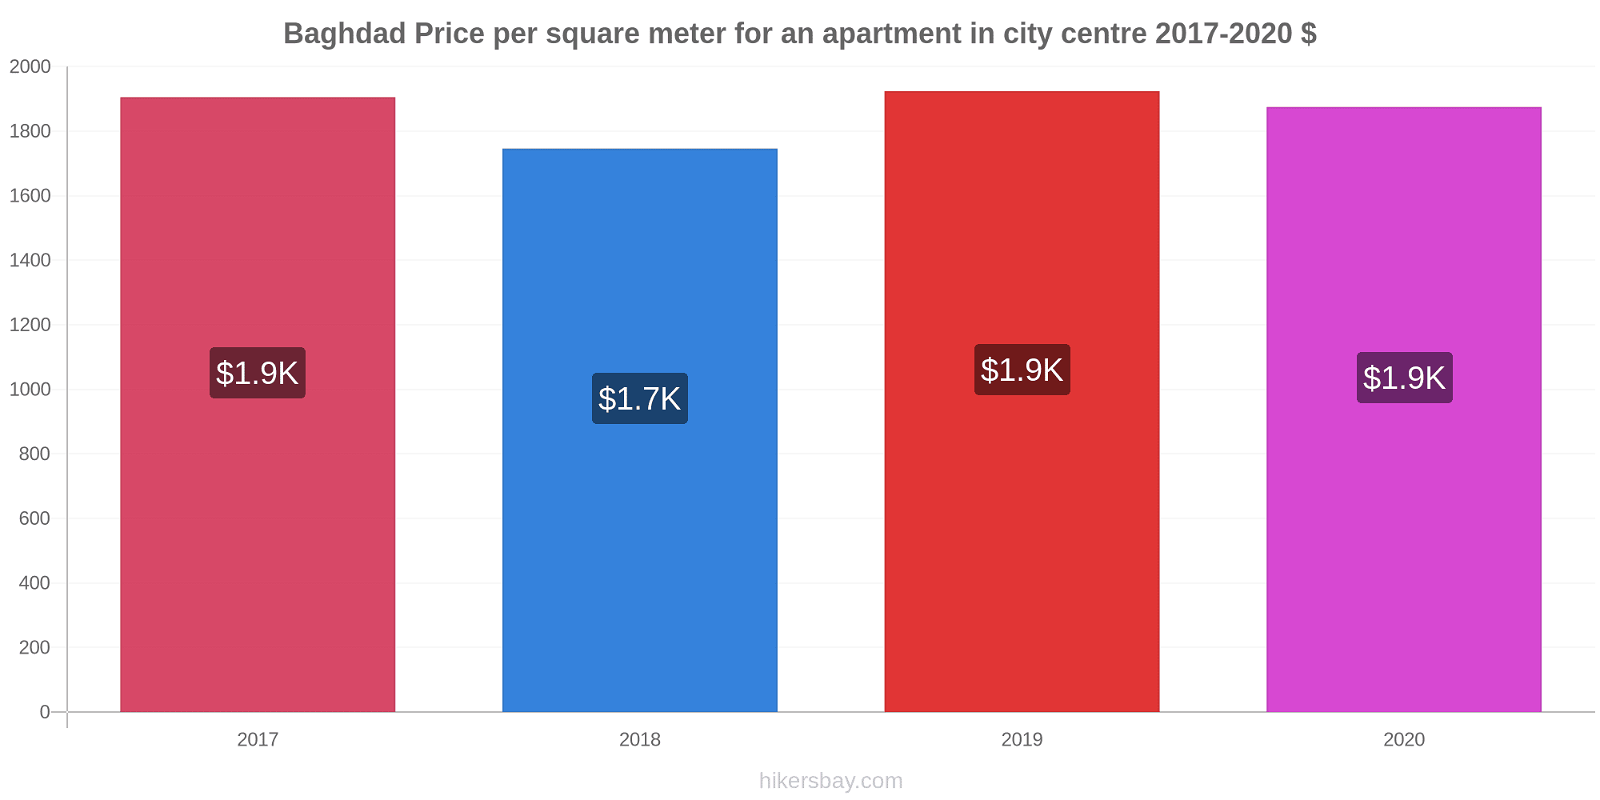 Baghdad price changes Price per square meter for an apartment in city centre hikersbay.com